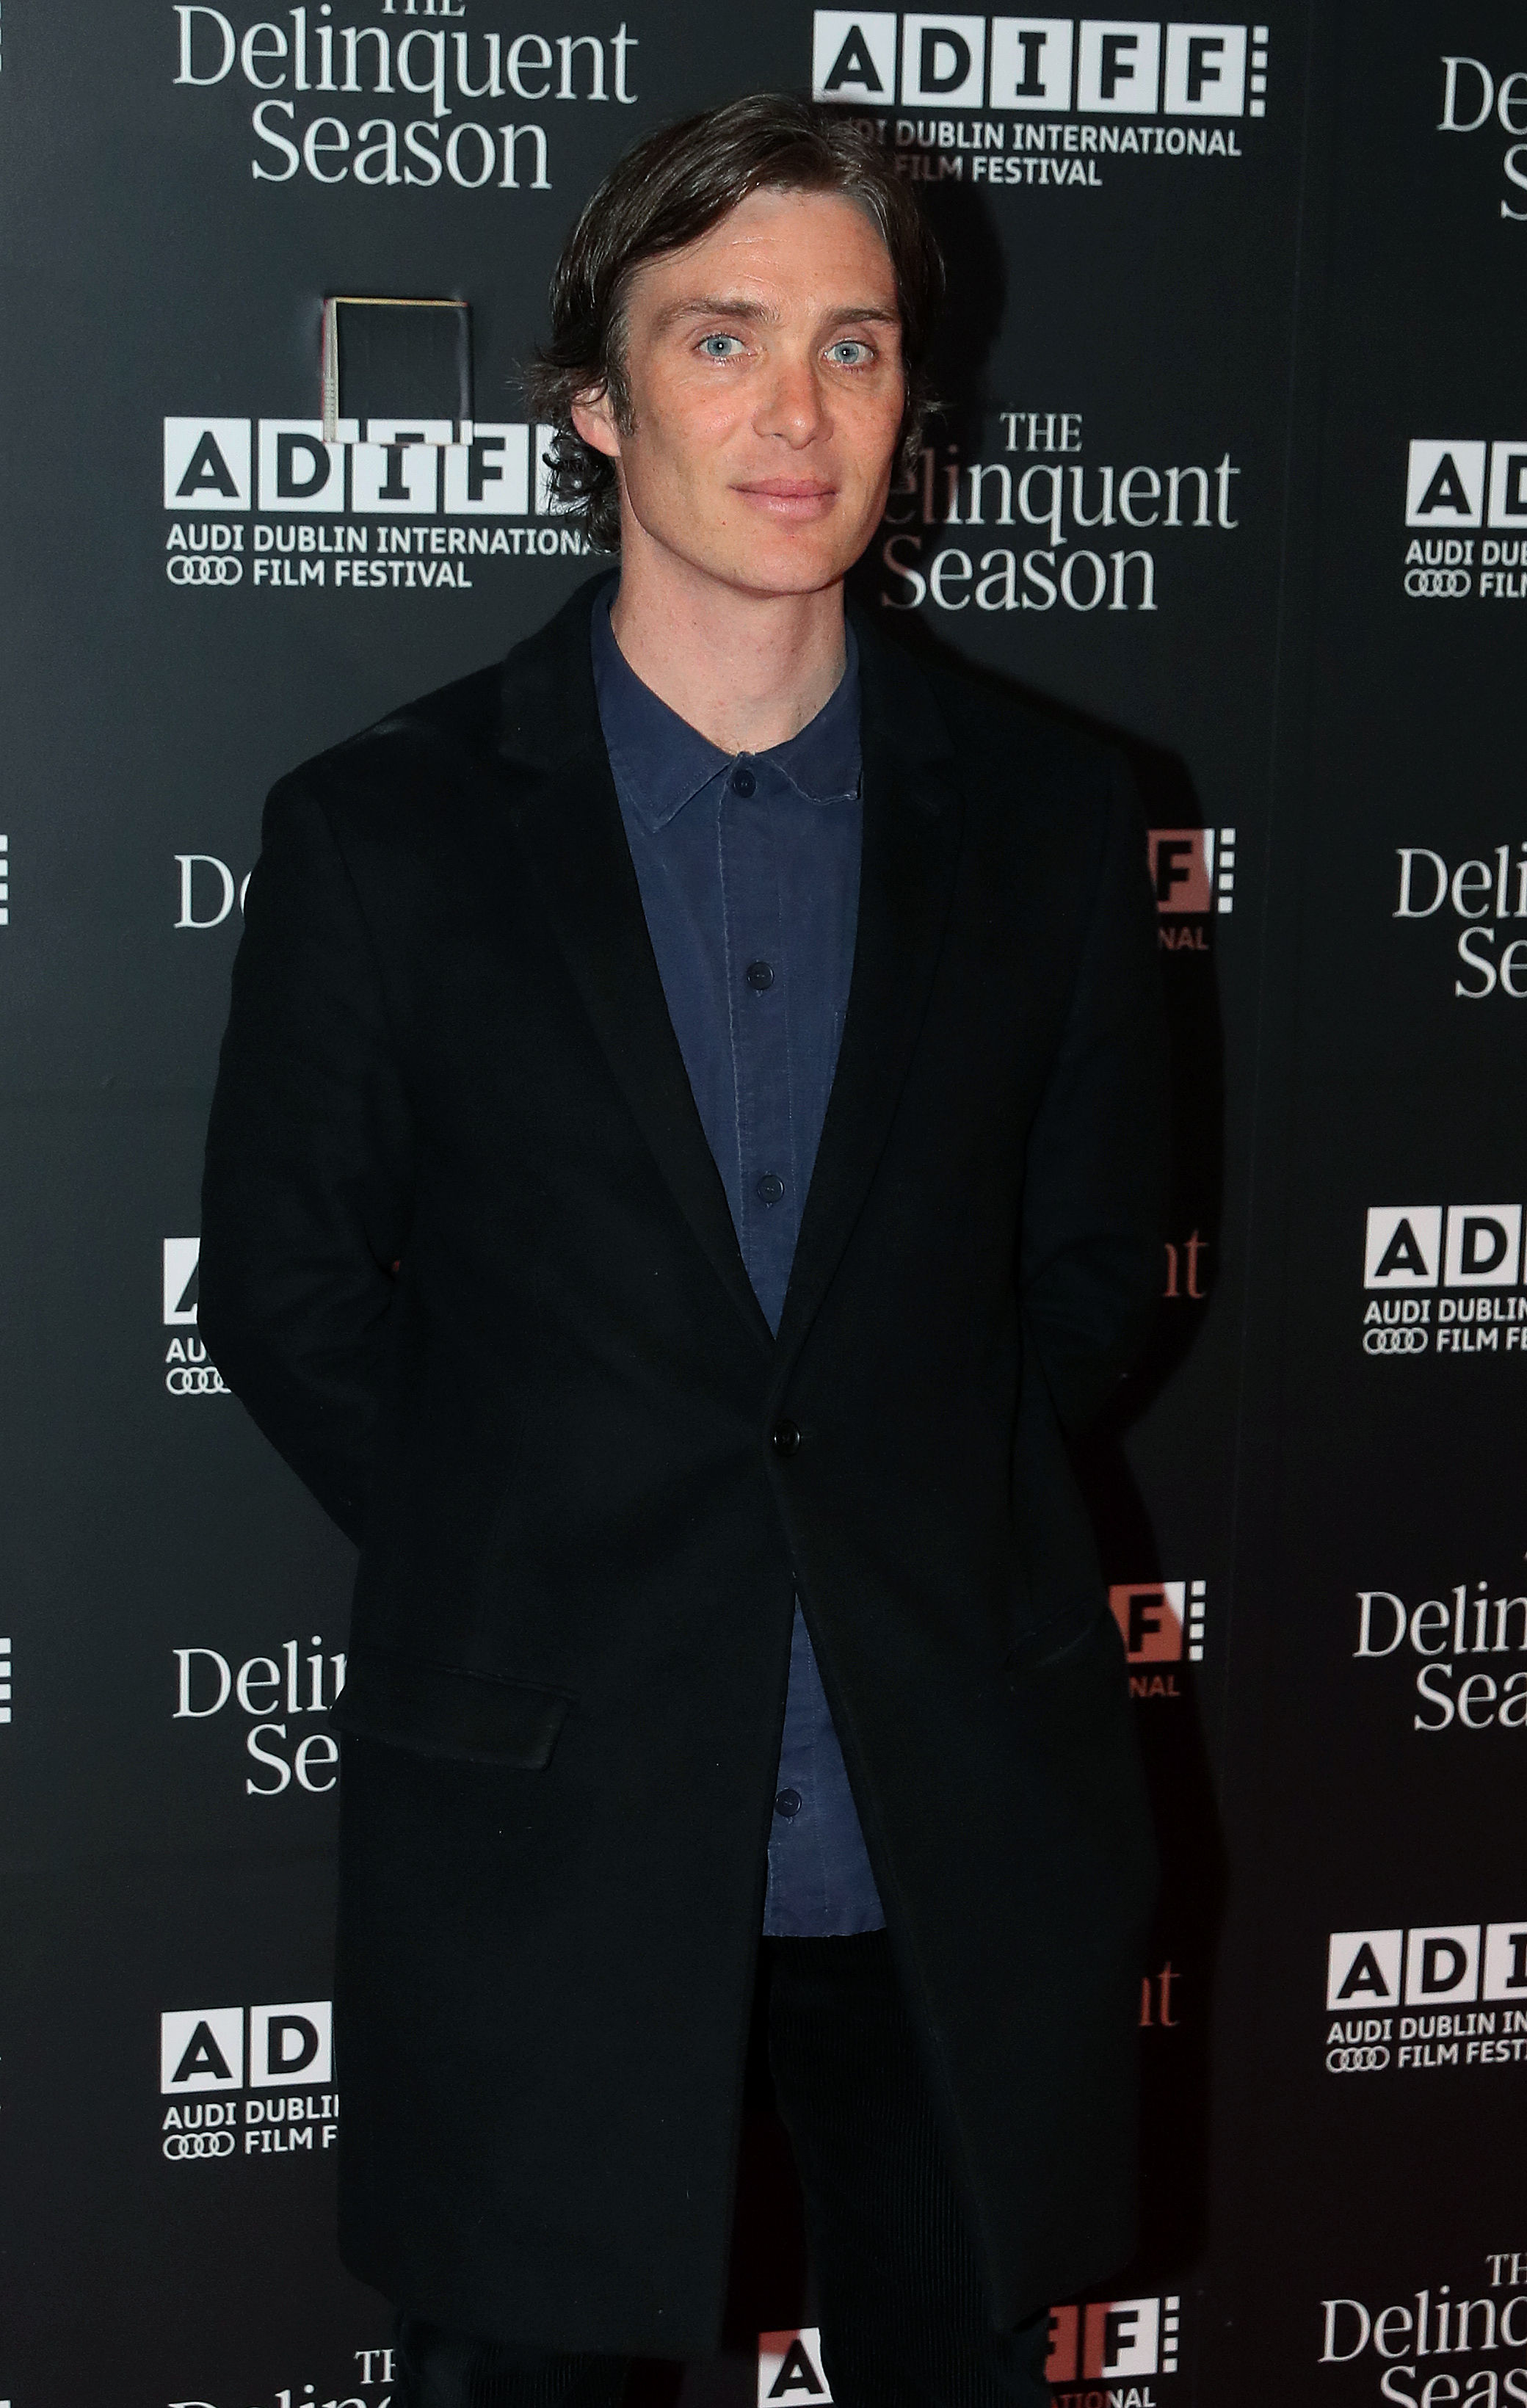 Cillian Murphy arrives for the world premiere of "The Delinquent Season" at Cineworld in Dublin, on April 25, 2018. | Source: Getty Images